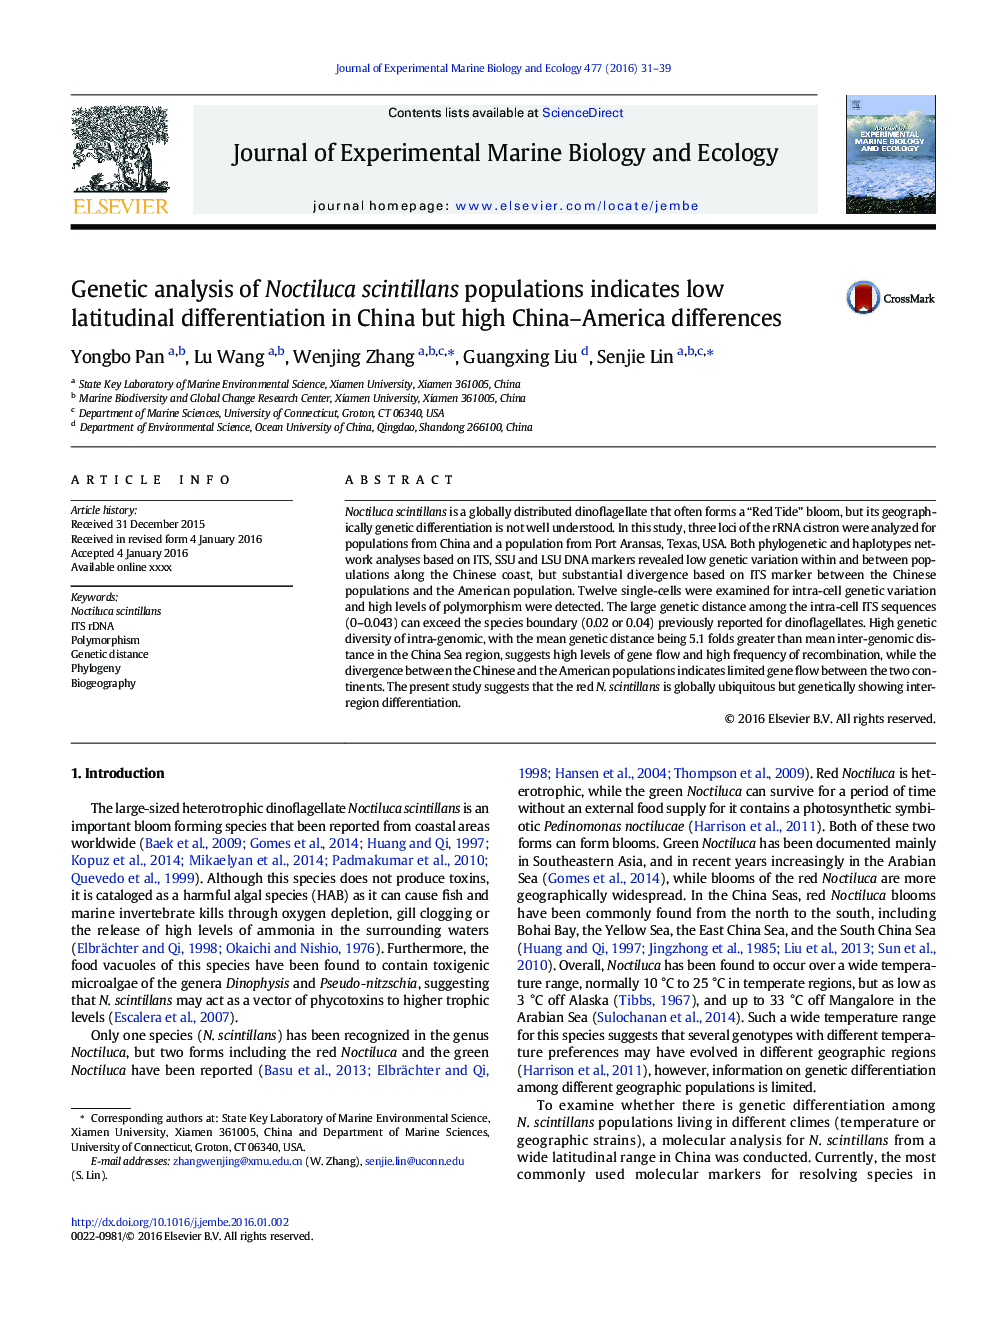 Genetic analysis of Noctiluca scintillans populations indicates low latitudinal differentiation in China but high China-America differences